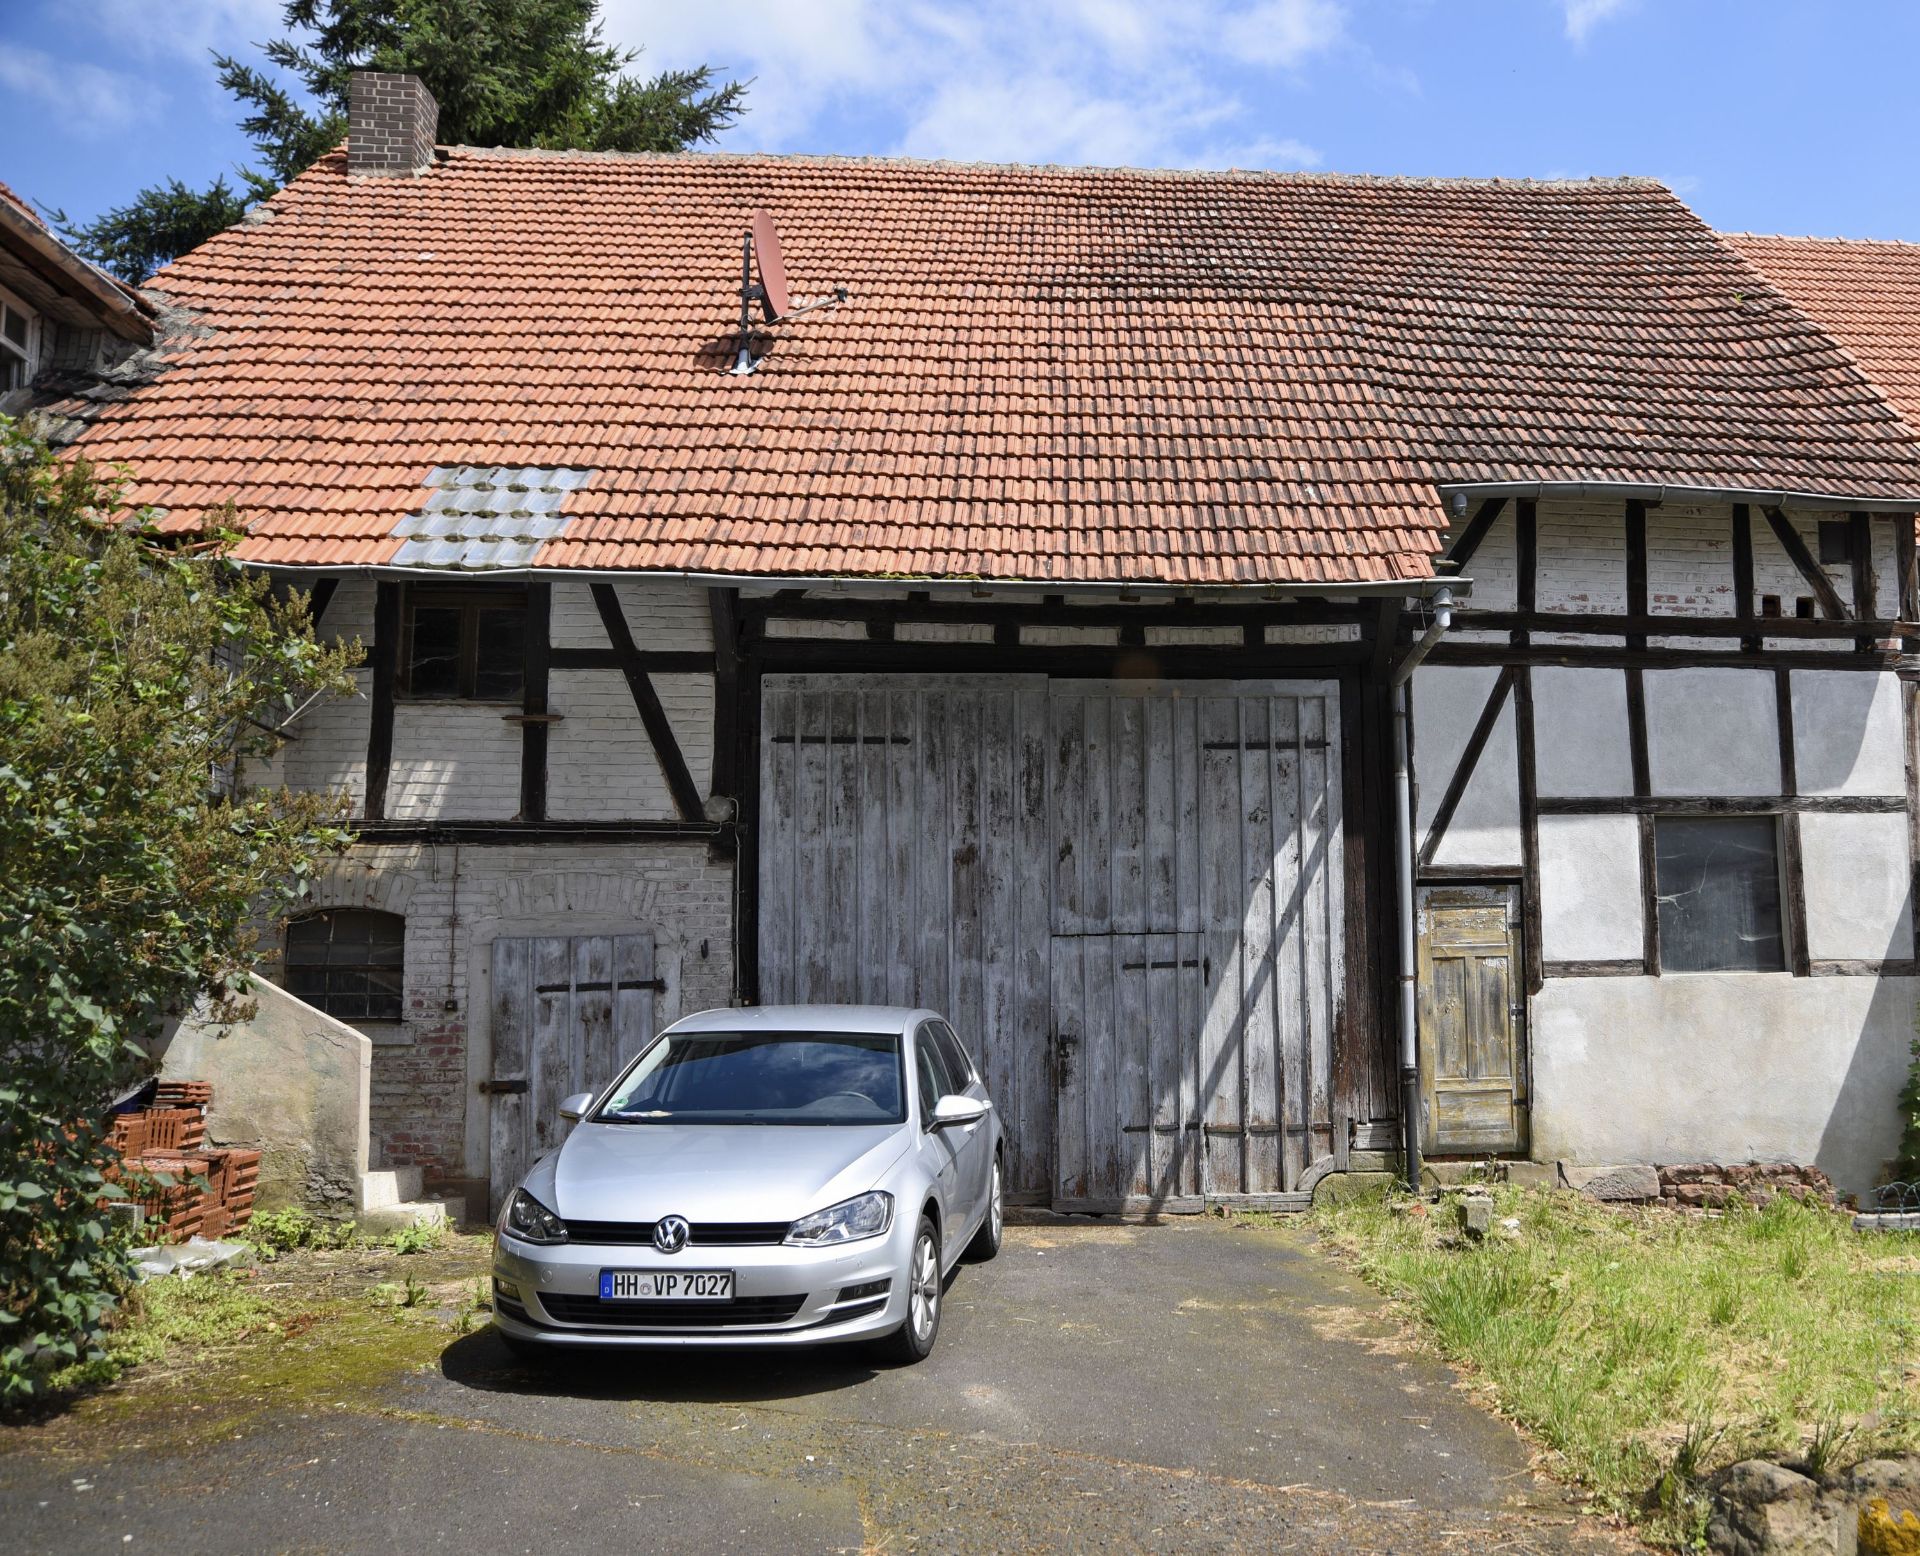 Freehold Property With 691 SQM Of Land In The Village Of Unterstoppel, Germany! - Image 13 of 60